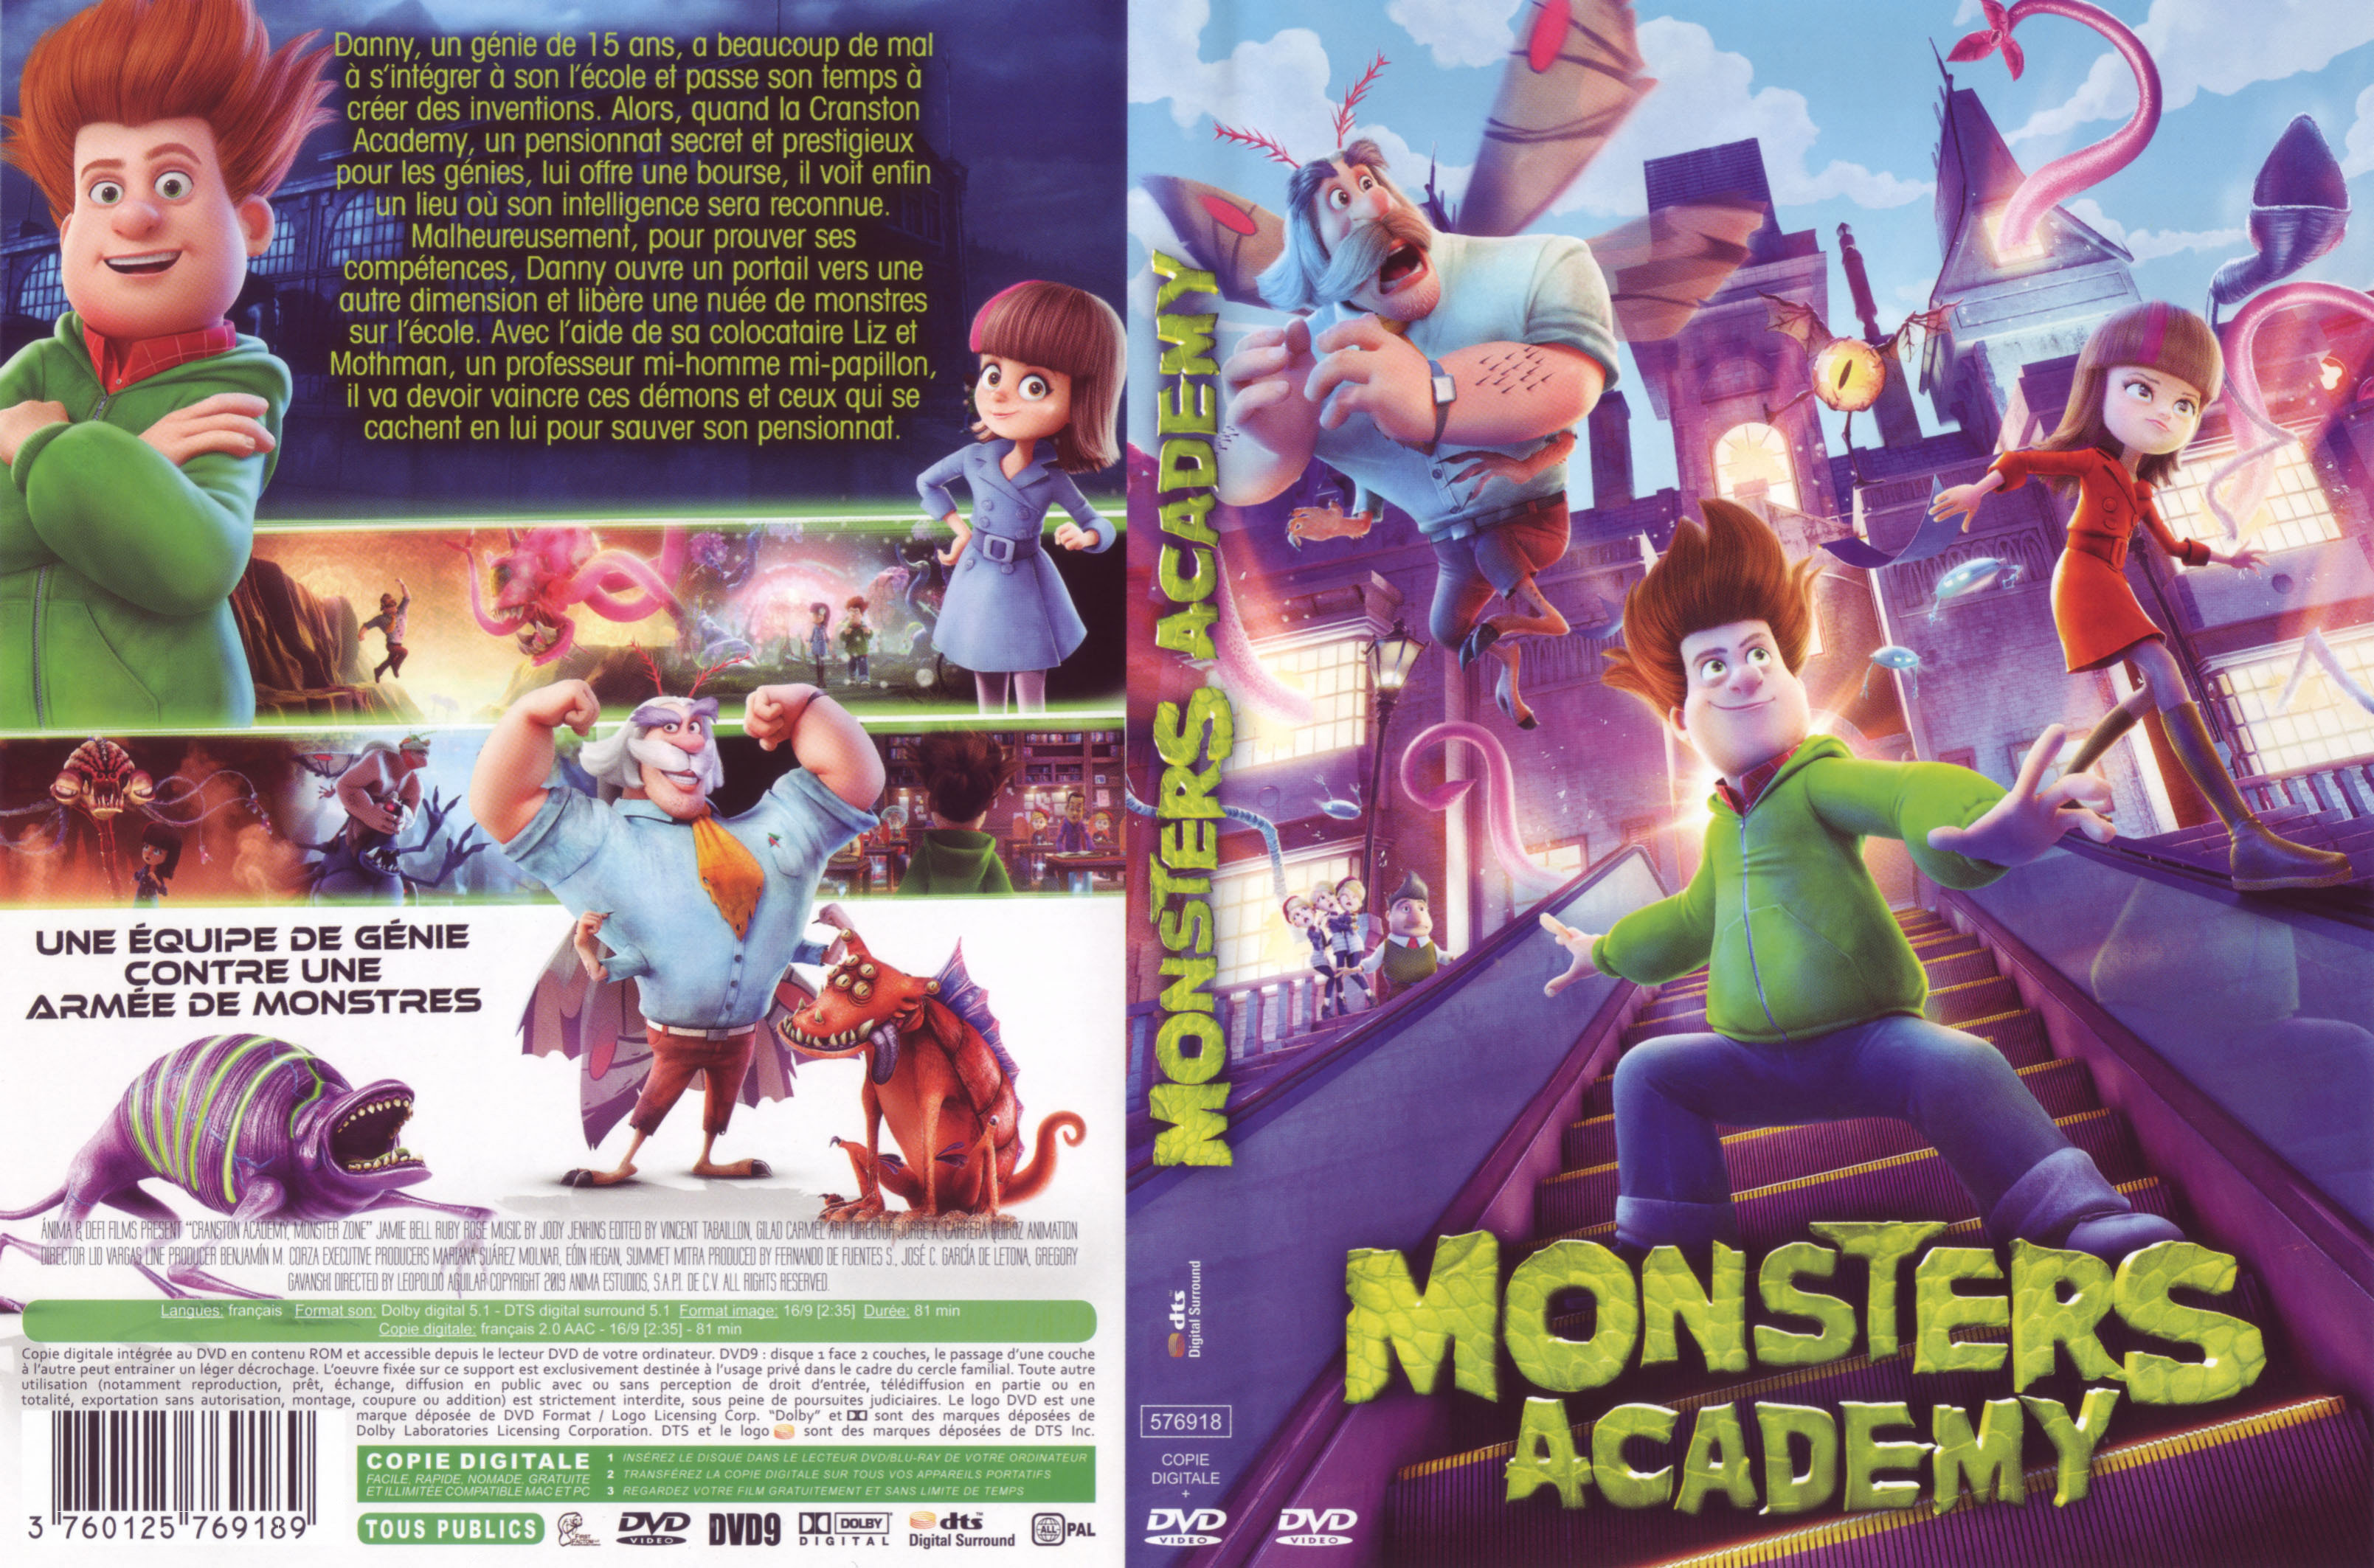 Jaquette DVD Monsters academy